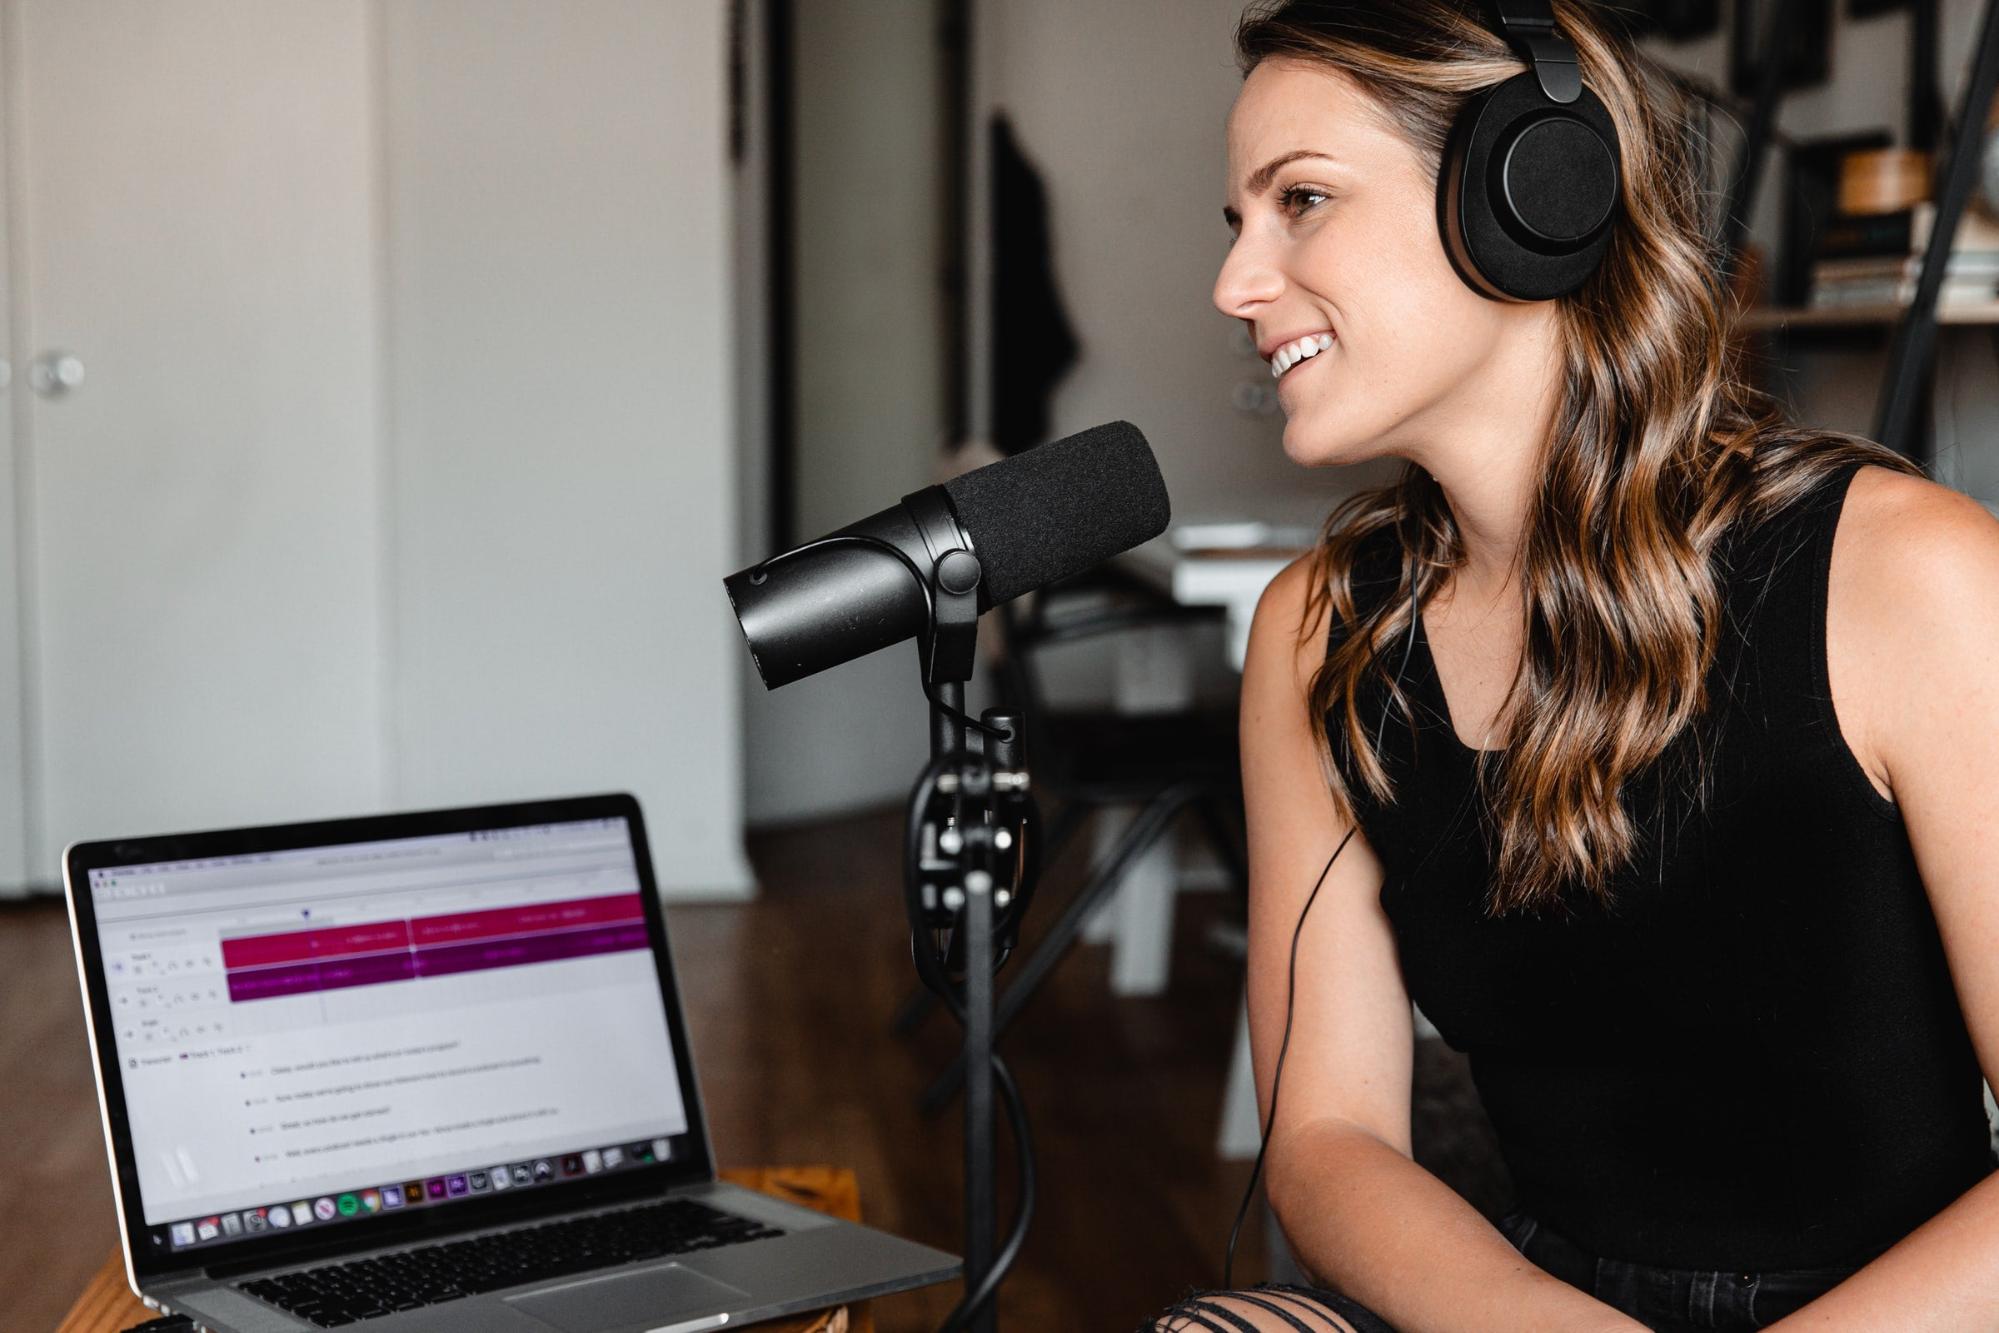 A woman wearing a black tank top sitting in front of a microphone and open laptop recording a podcast